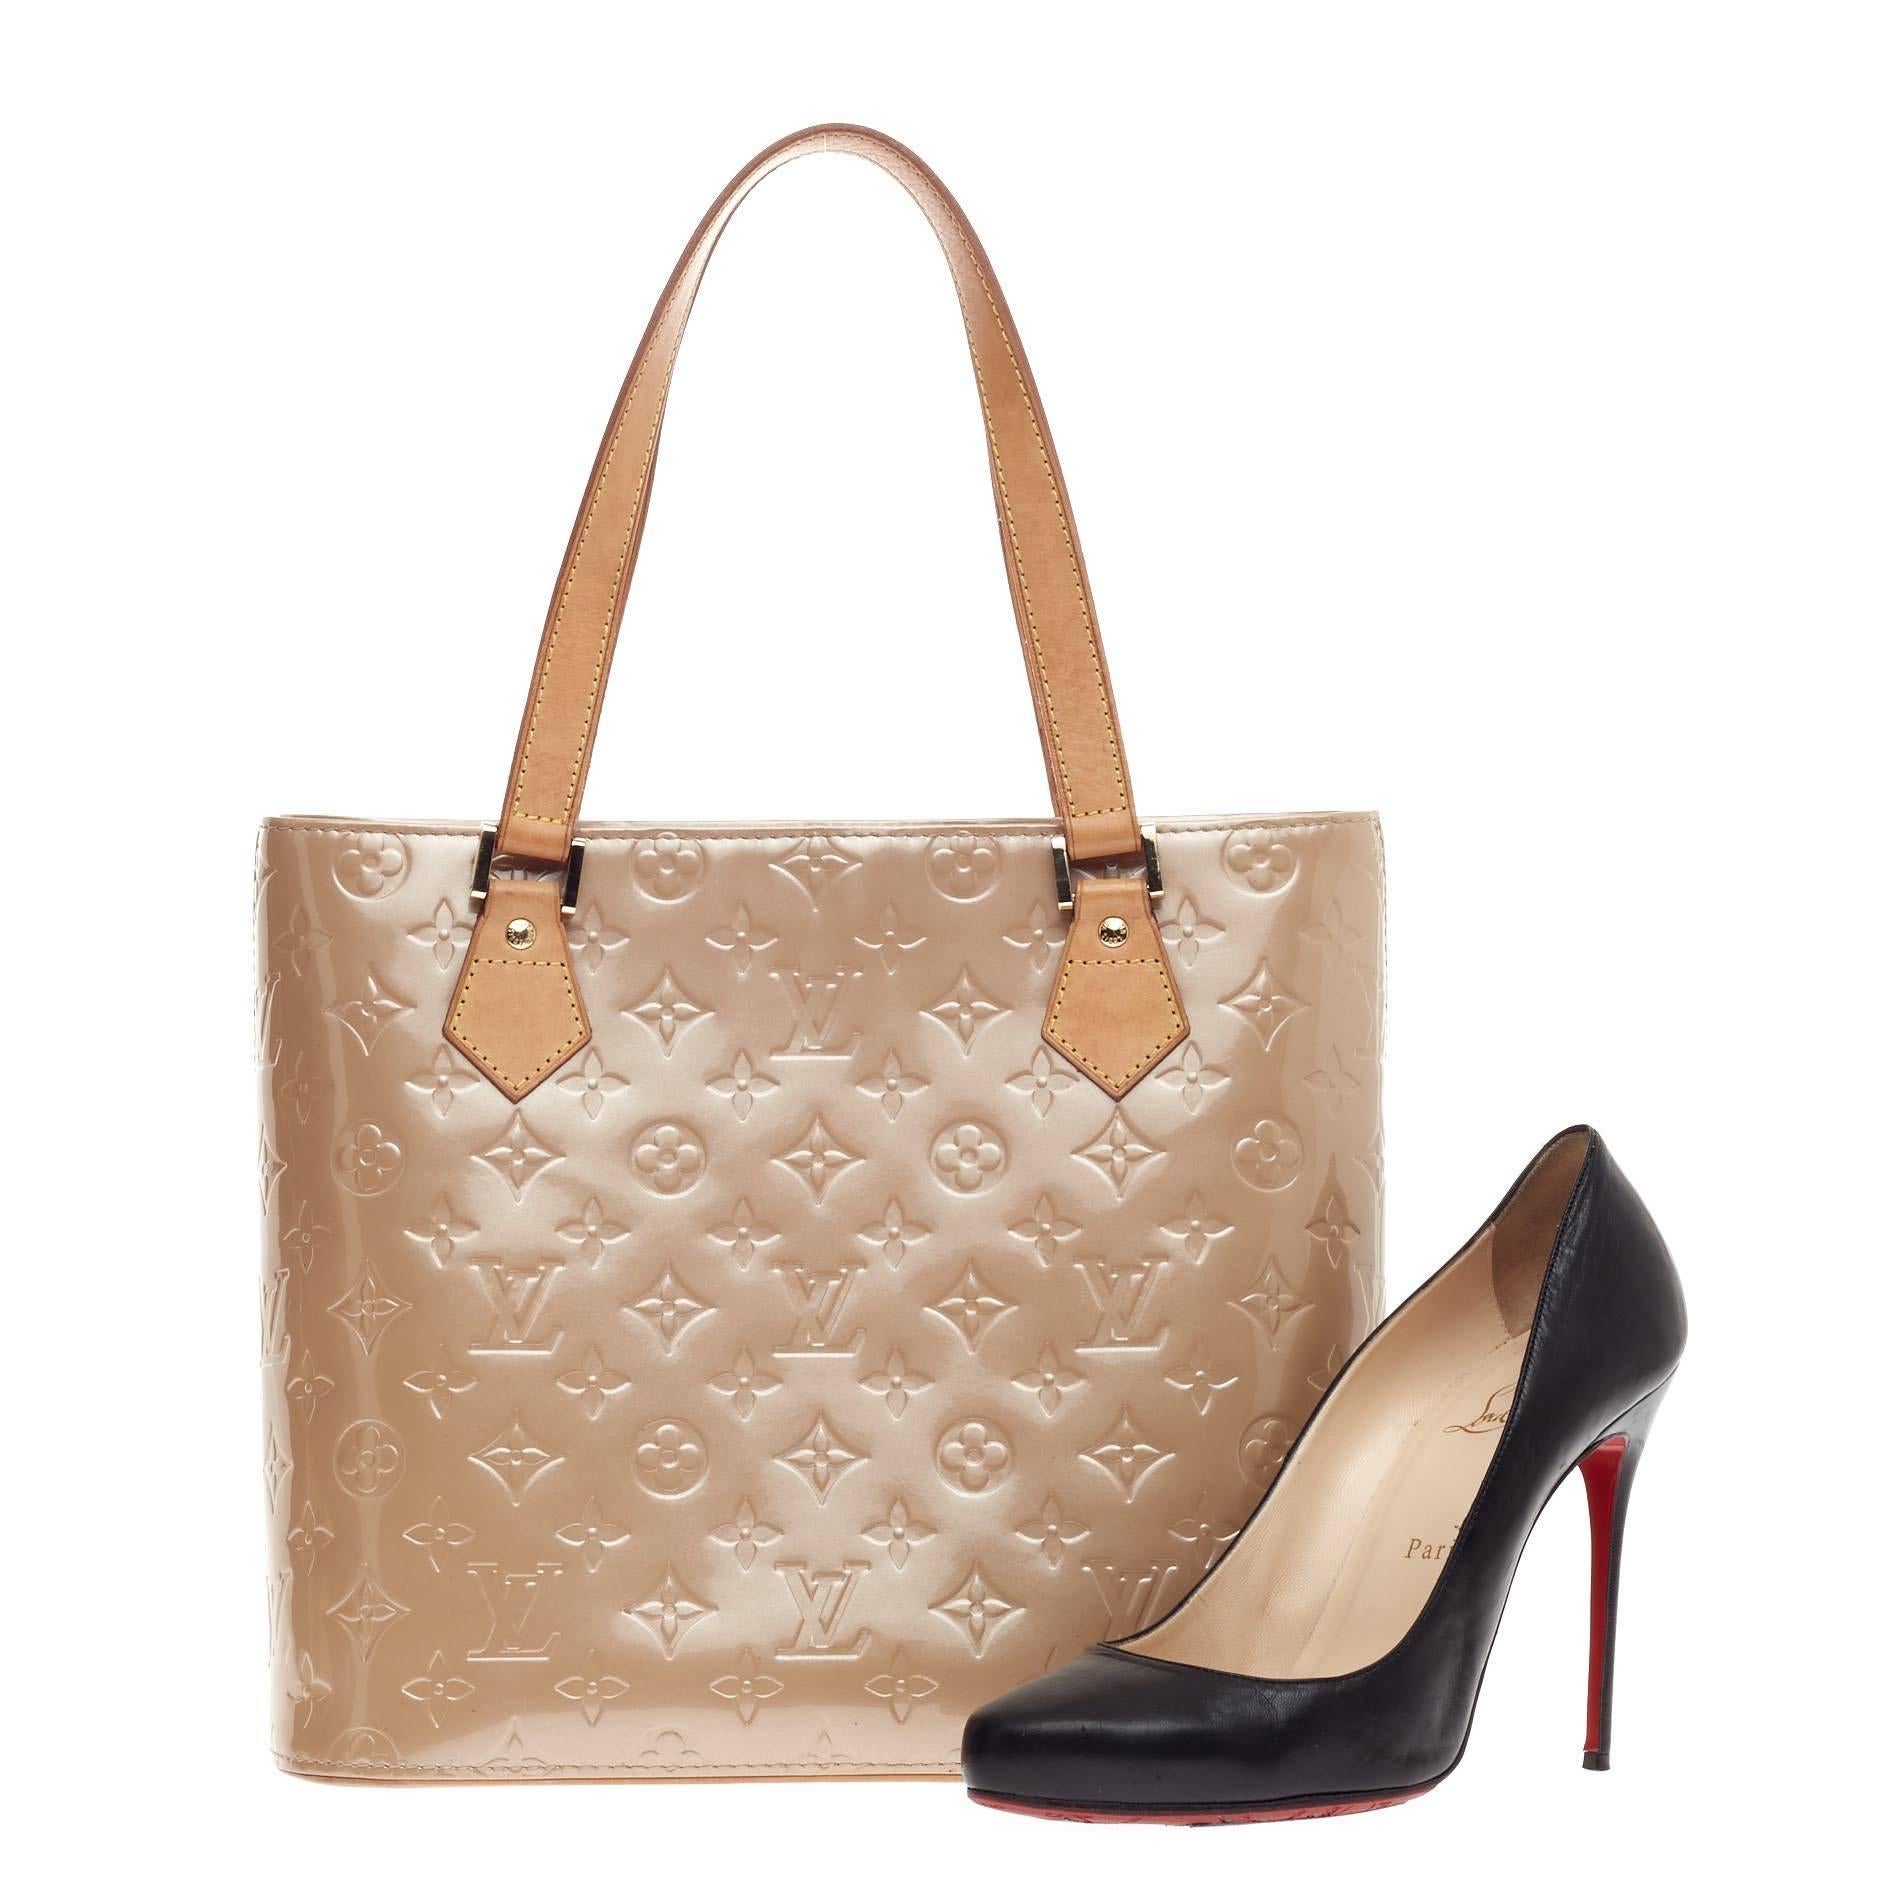 This authentic Louis Vuitton Houston Tote Monogram Vernis is a stylish and functional bag made for everyday use or weekend getaways. Crafted from noisette beige monogram embossed vernis leather, this tote features dual flat tall vachetta leather